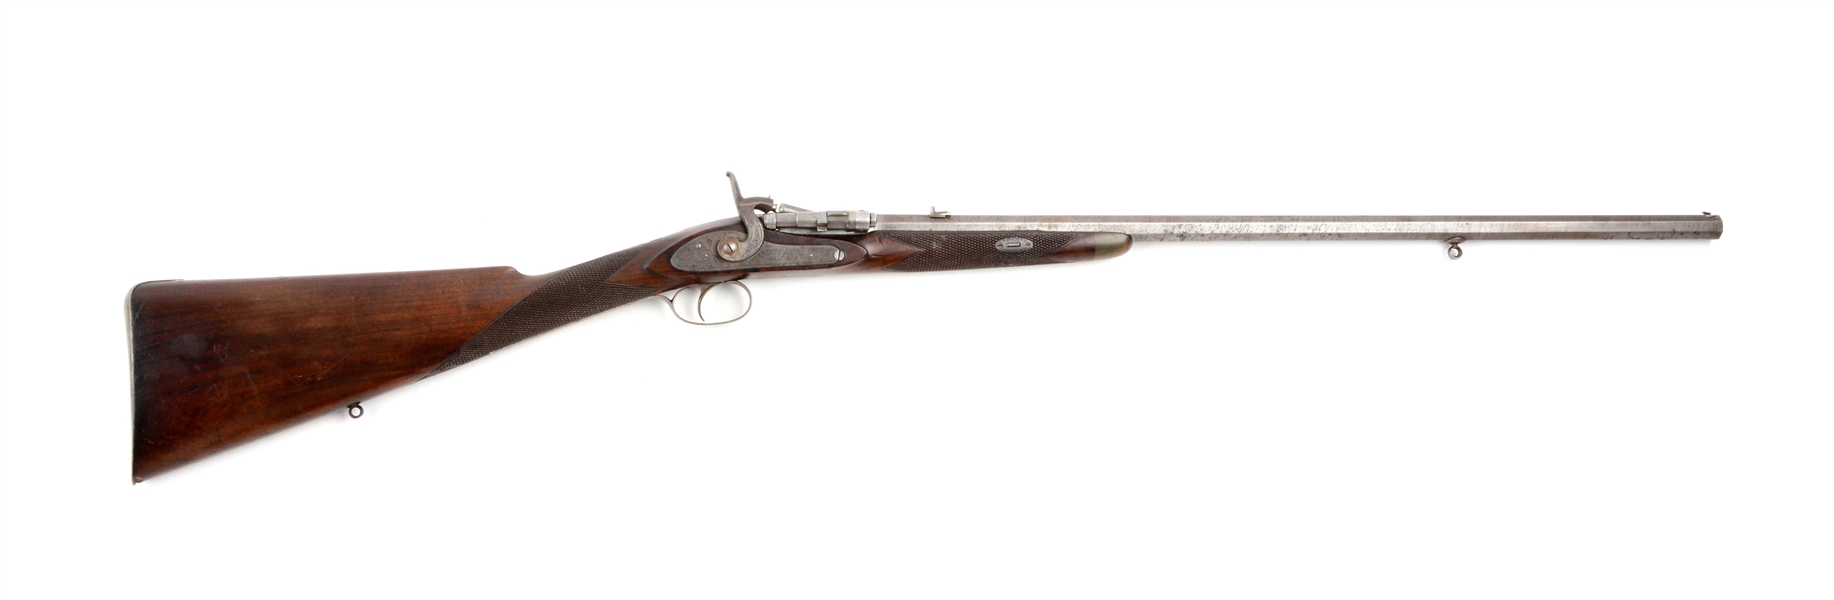 (A) SNIDER SPORTING ROOK RIFLE BY M. LOFLEY BRIGG.